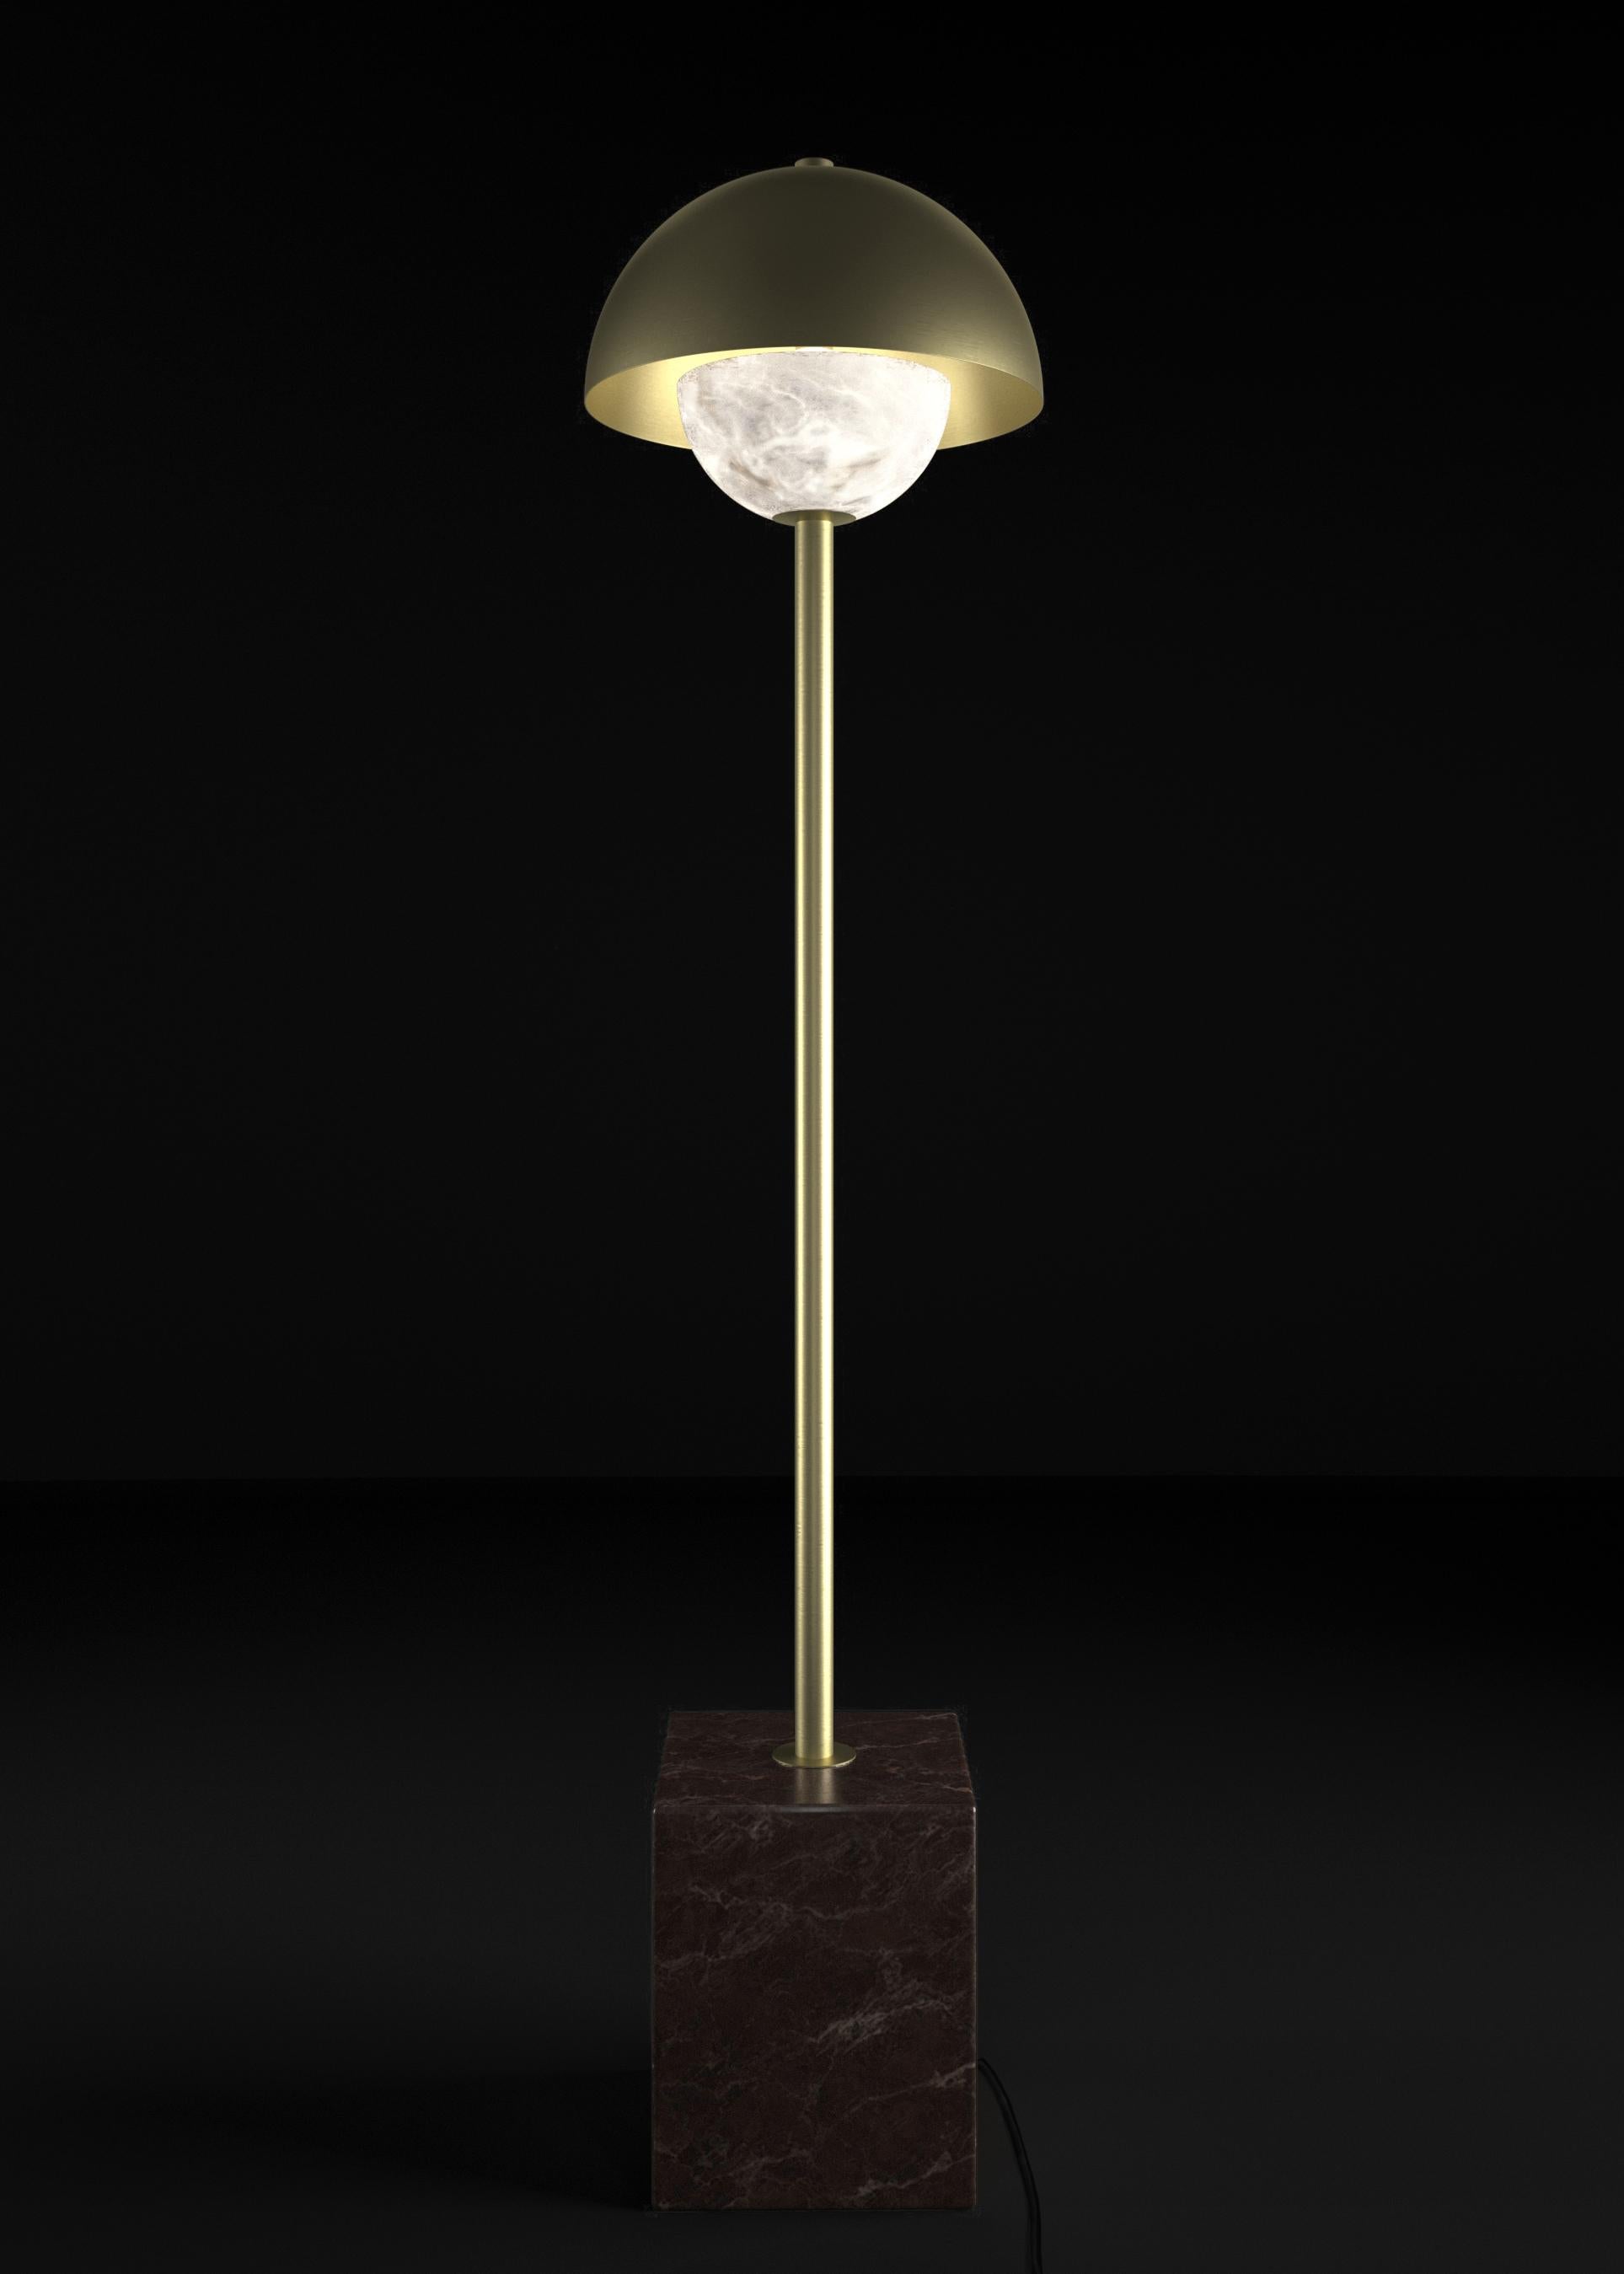 Apollo Brushed Brass Metal Floor Lamp by Alabastro Italiano
Dimensions: D 30 x W 30 x H 130 cm.
Materials: White alabaster, Nero Marquinia marble, black silk cables and metal.

Available in different finishes: Shiny Silver, Bronze, Brushed Brass,